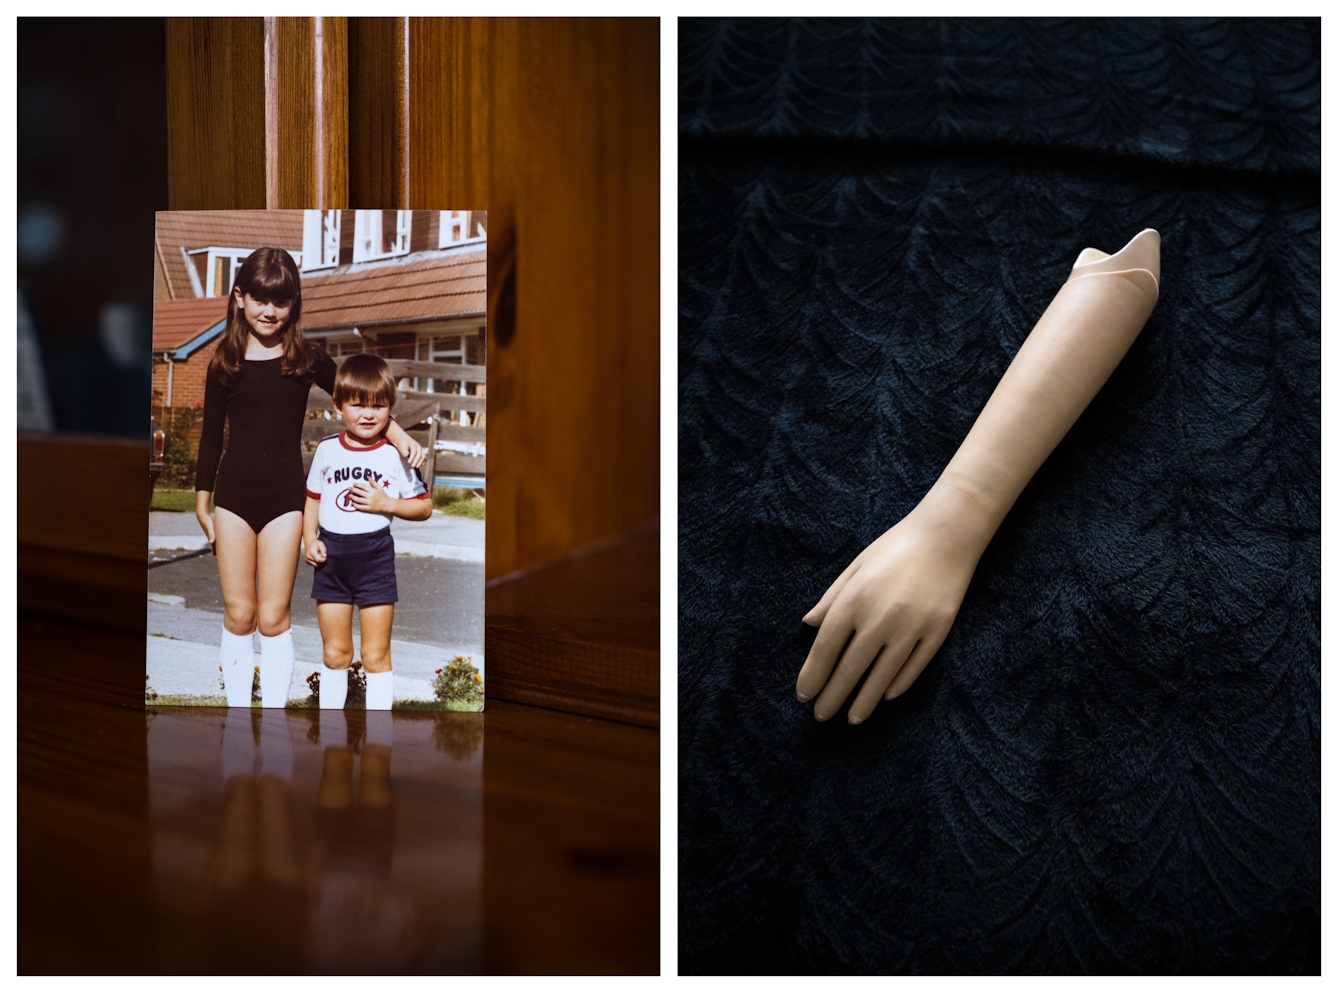 Photographic Diptych. The image on the left shows a family photo propped up on a wood shelf. In the photo is a girl next to a younger boy. The has a prosthetic left arm which she is resting on the boy's shoulder. The image on the right shows the prosthetic arm resting on a dark blue embroidered bed spread.